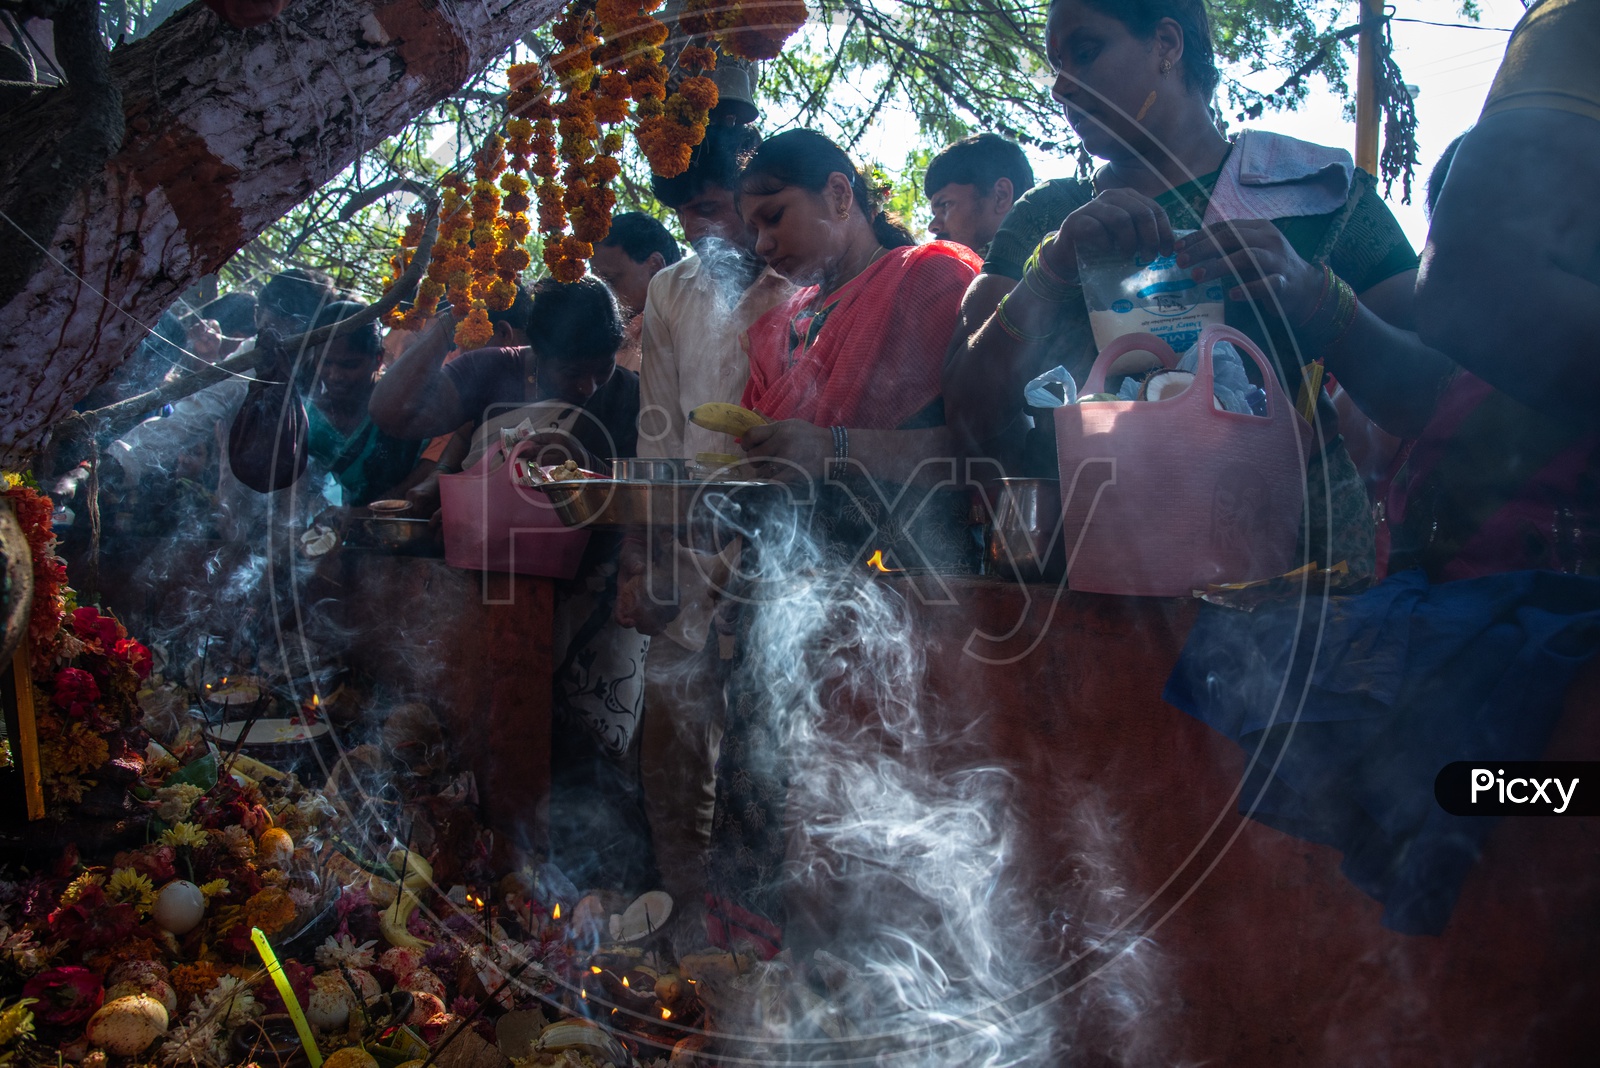 Nagula Panchami/Chavithi, observed on the fourth day of deepawali observed by married women and men offering Eggs and Milk to Snakes especially Cobra's near snake pits